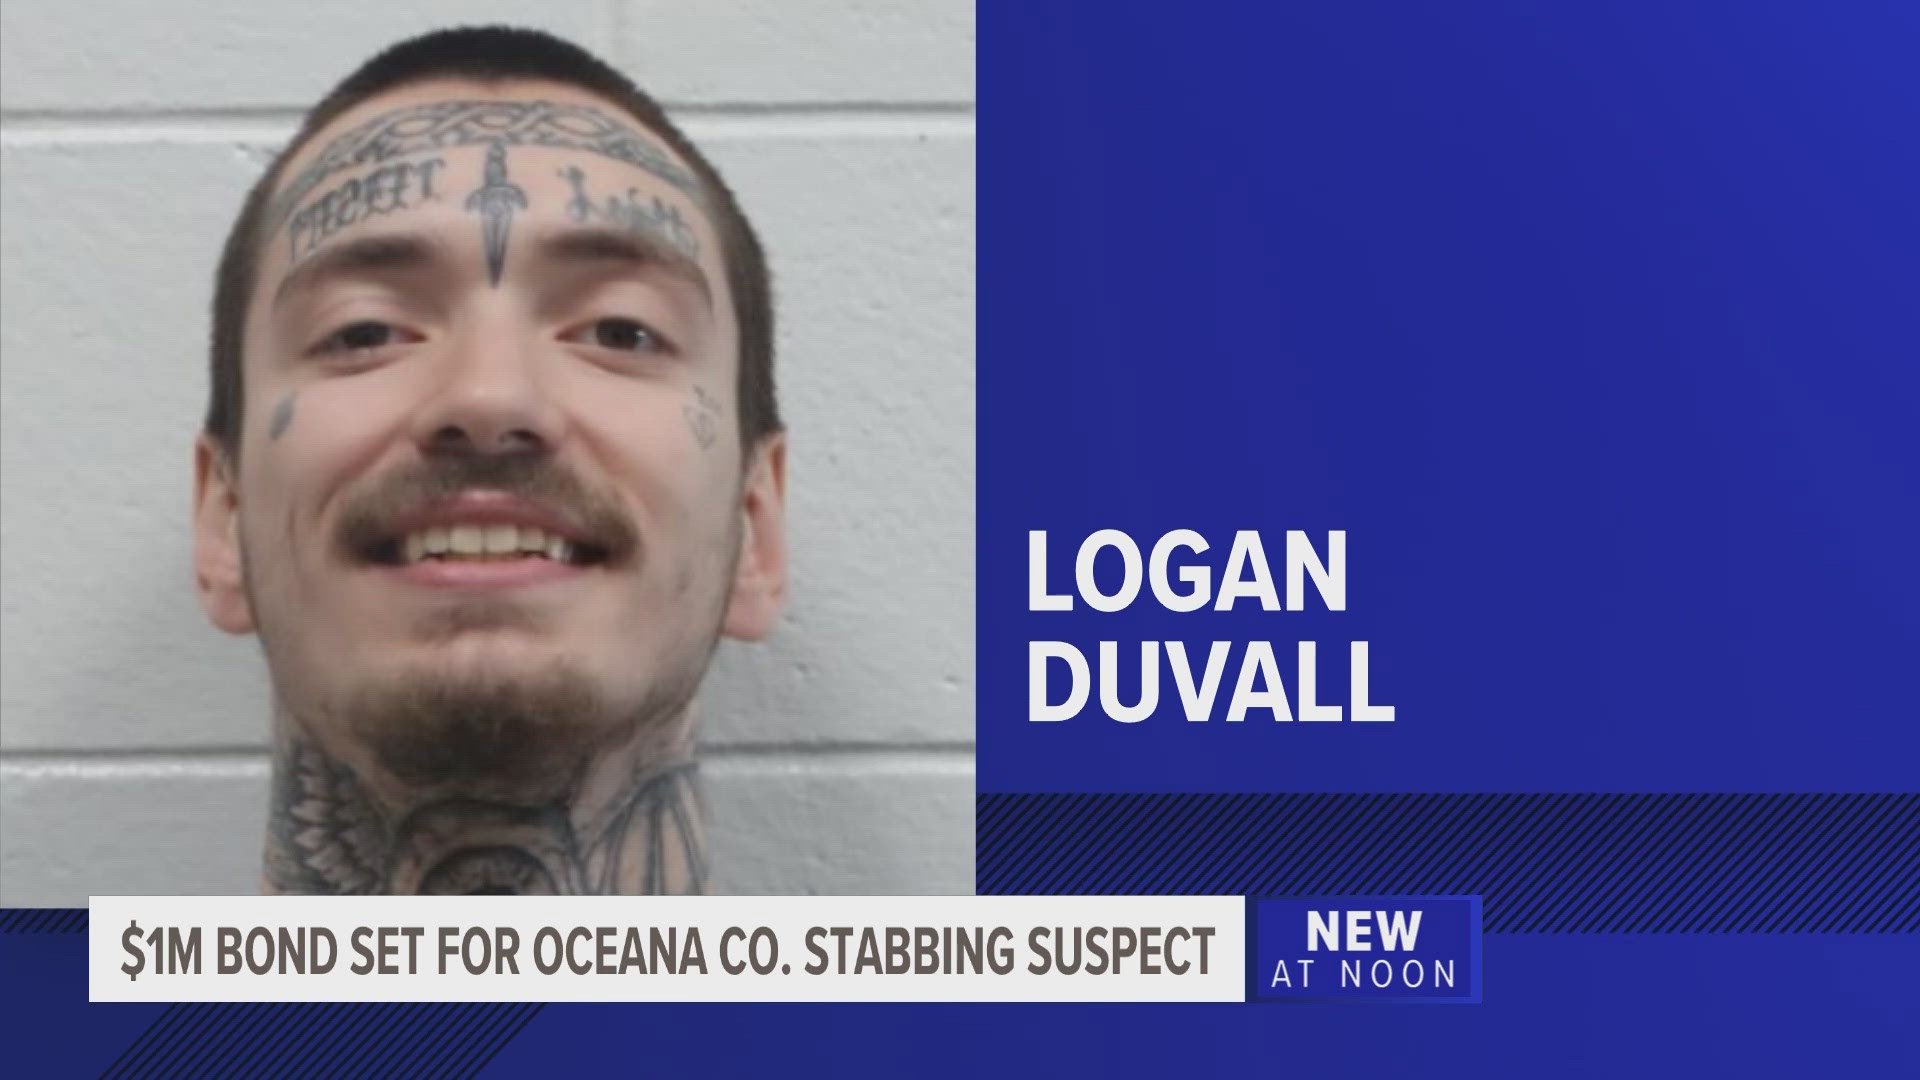 Logan Duvall is accused of stabbing someone he knew in the neck, causing severe injuries. He was out on bond when the incident happened.